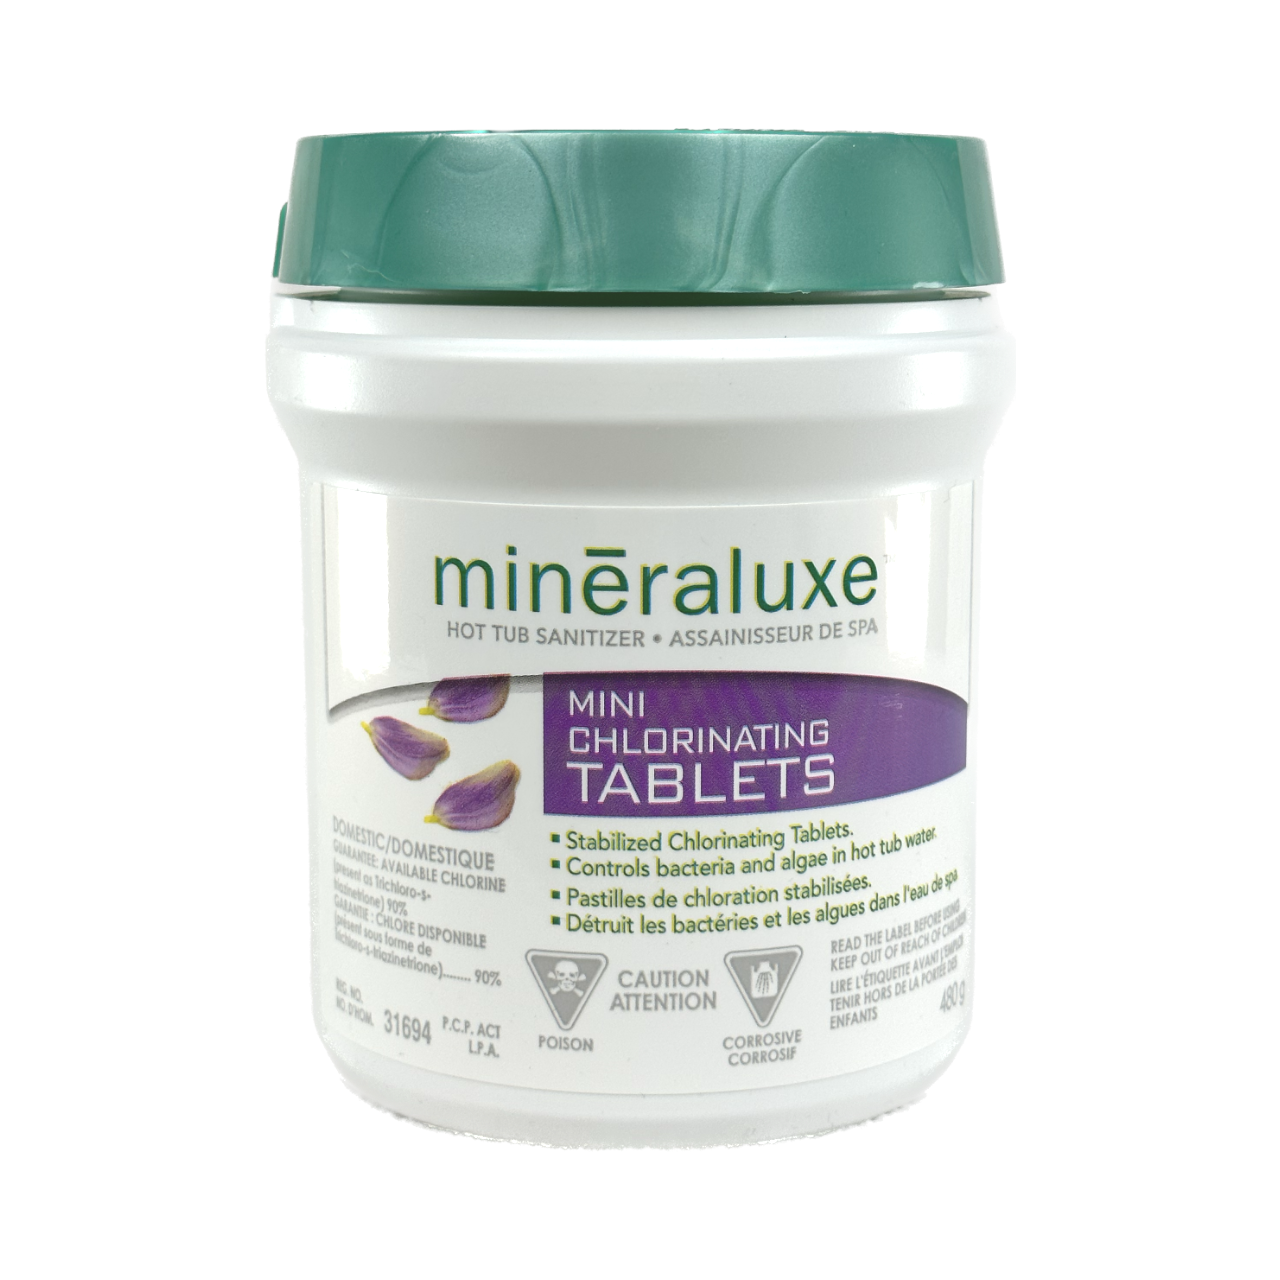 Mineraluxe™ Mini Chlorinating Tablets